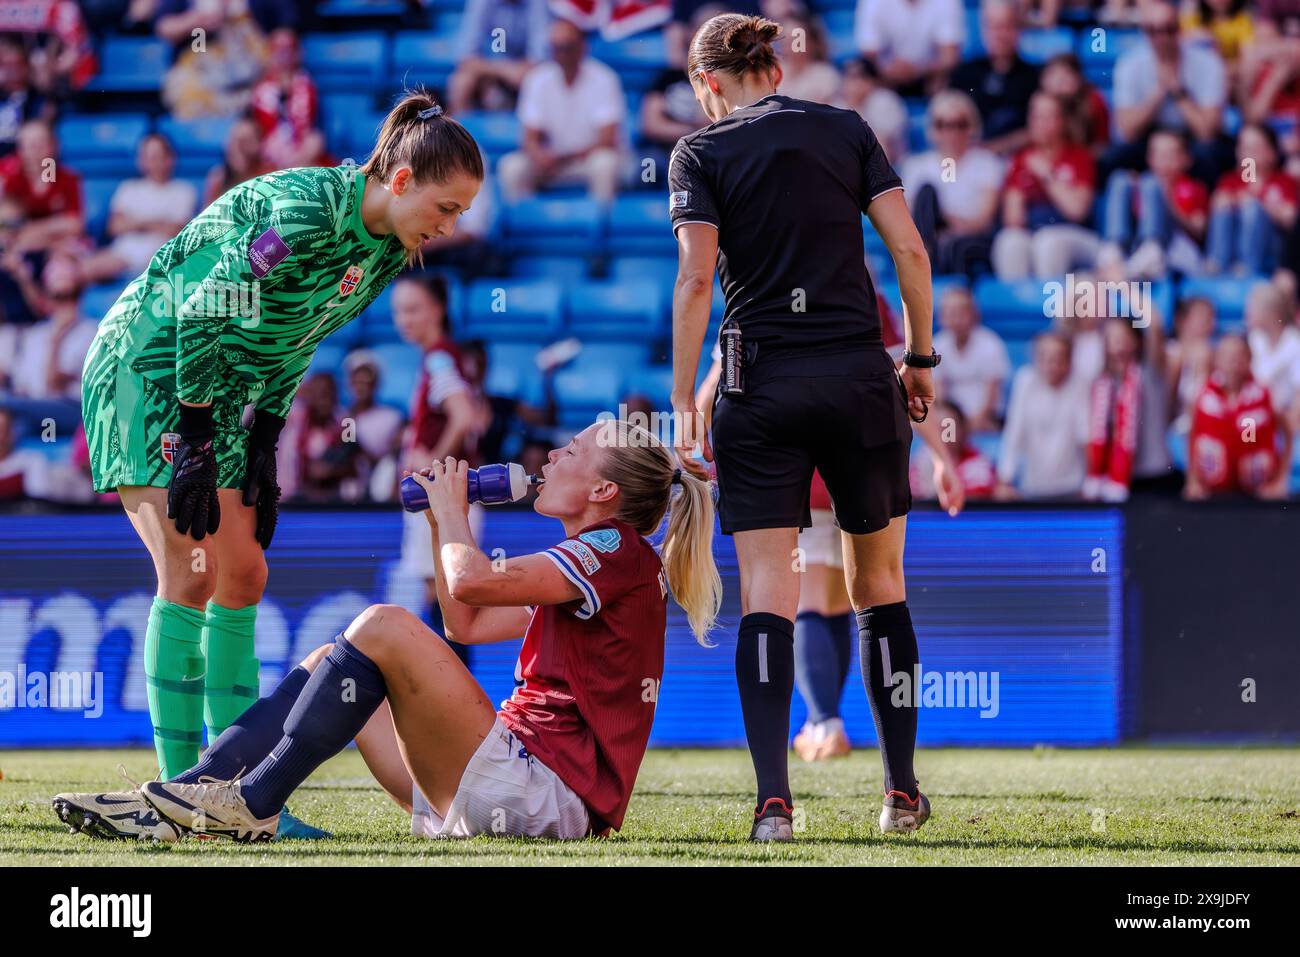 Oslo, Norway. 31st, May 2024. Goalkeeper Cecilei Fiskerstrand (1) of Norway seen during the UEFA European Qualifier match between Norway and Italy at Ullevaal Stadion in Oslo. (Photo credit: Gonzales Photo - Ketil Martinsen). Stock Photo